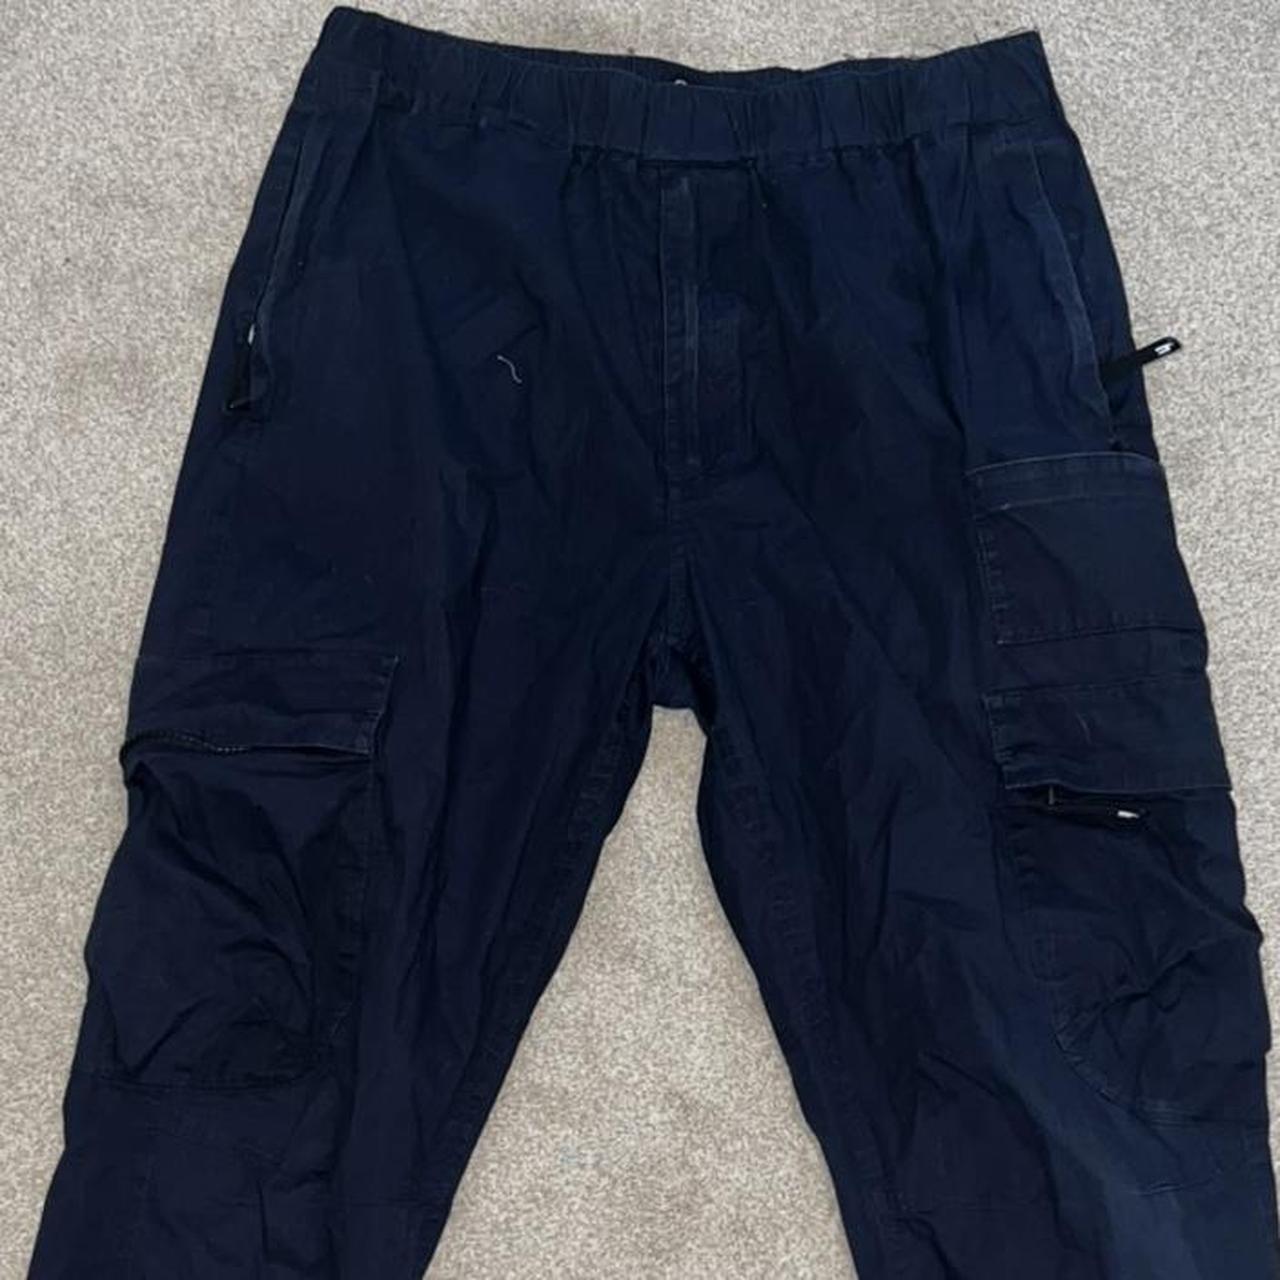 Yelir Mens Cargo / Combat Pants As can see from... - Depop